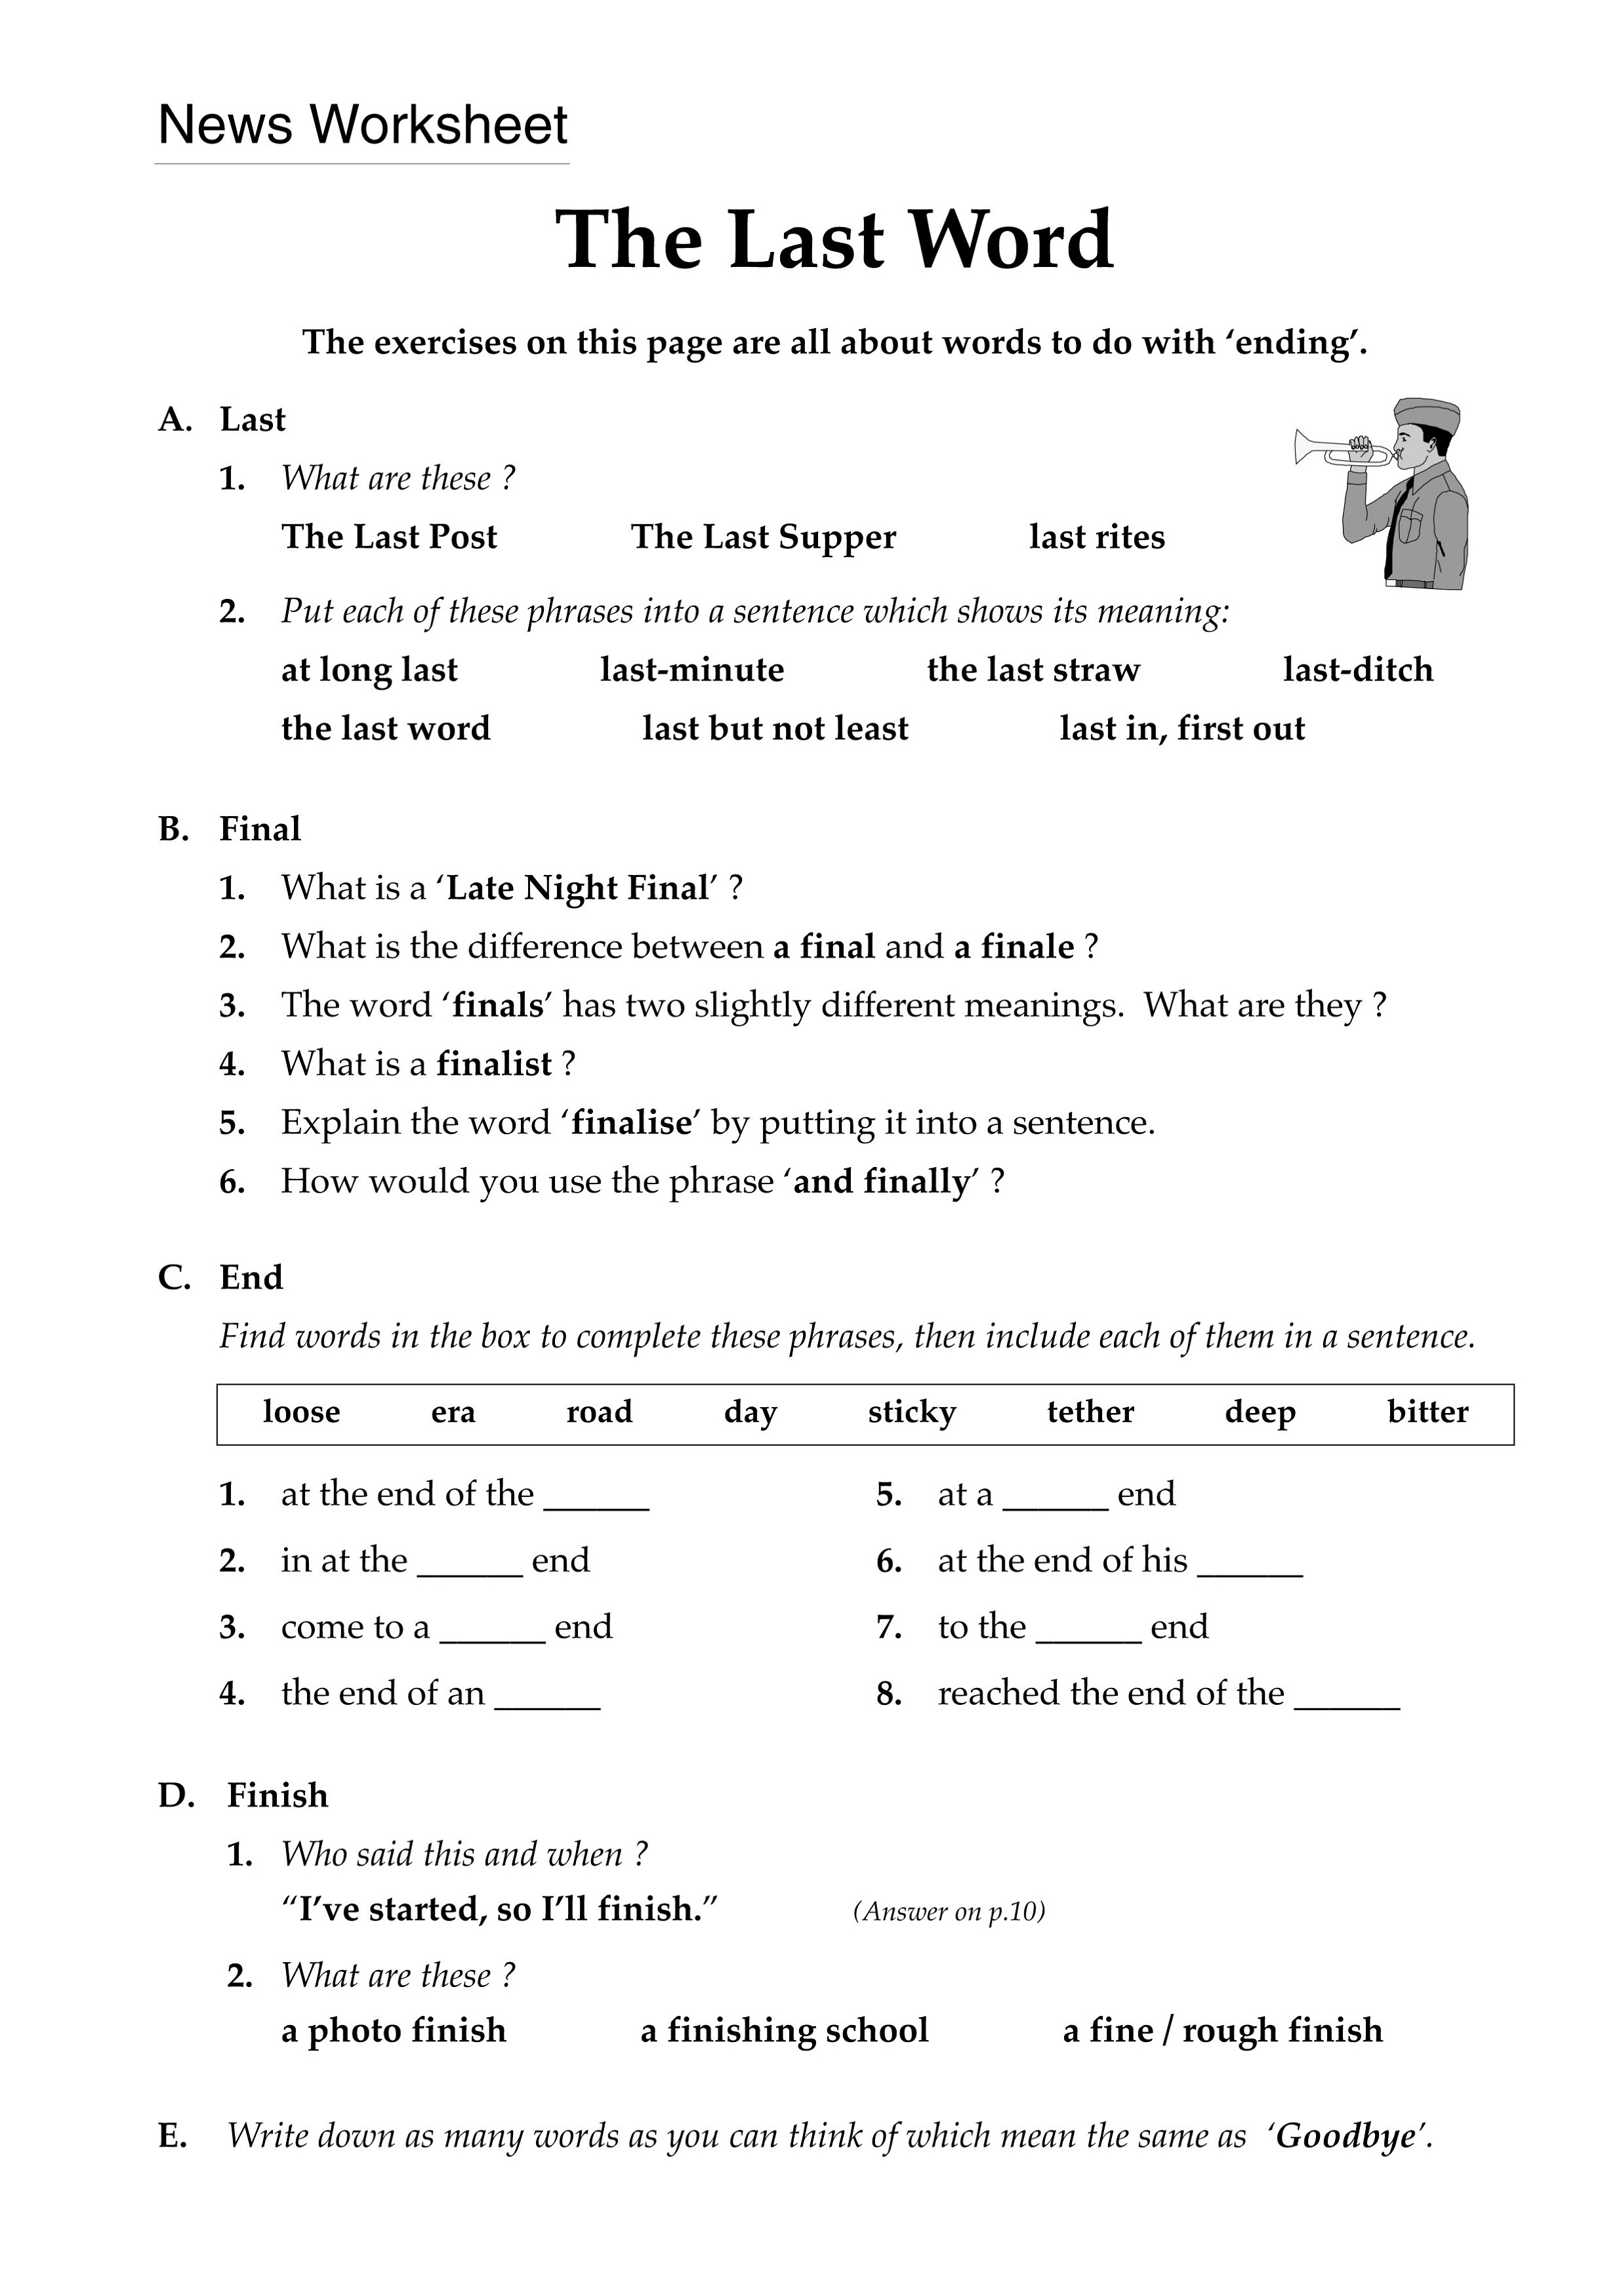 free-advanced-literacy-worksheets-comprehension-learning-printable